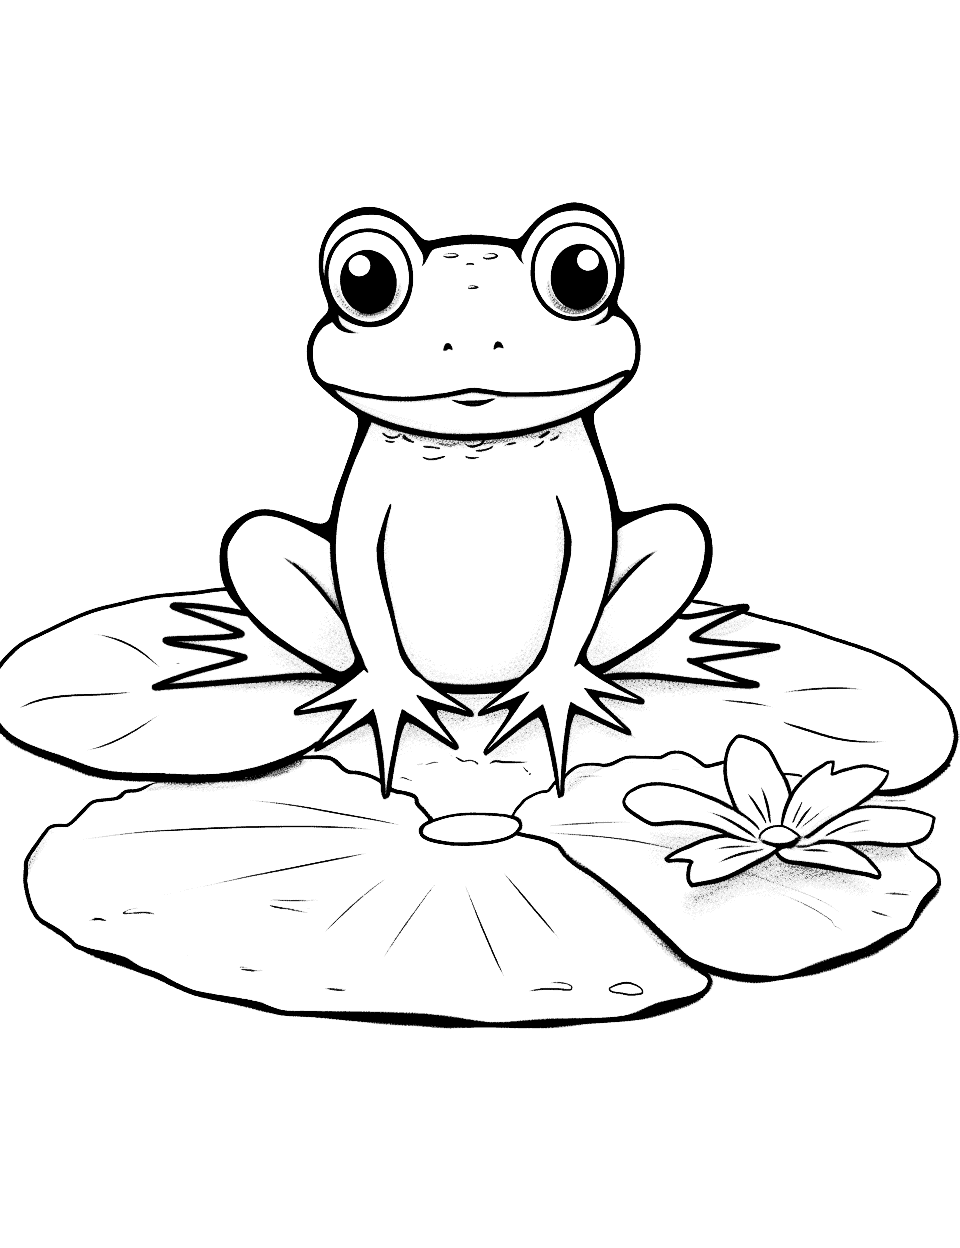 Cute Frog on a Lily Pad Coloring Page - A small frog sitting on a lily pad in a pond.